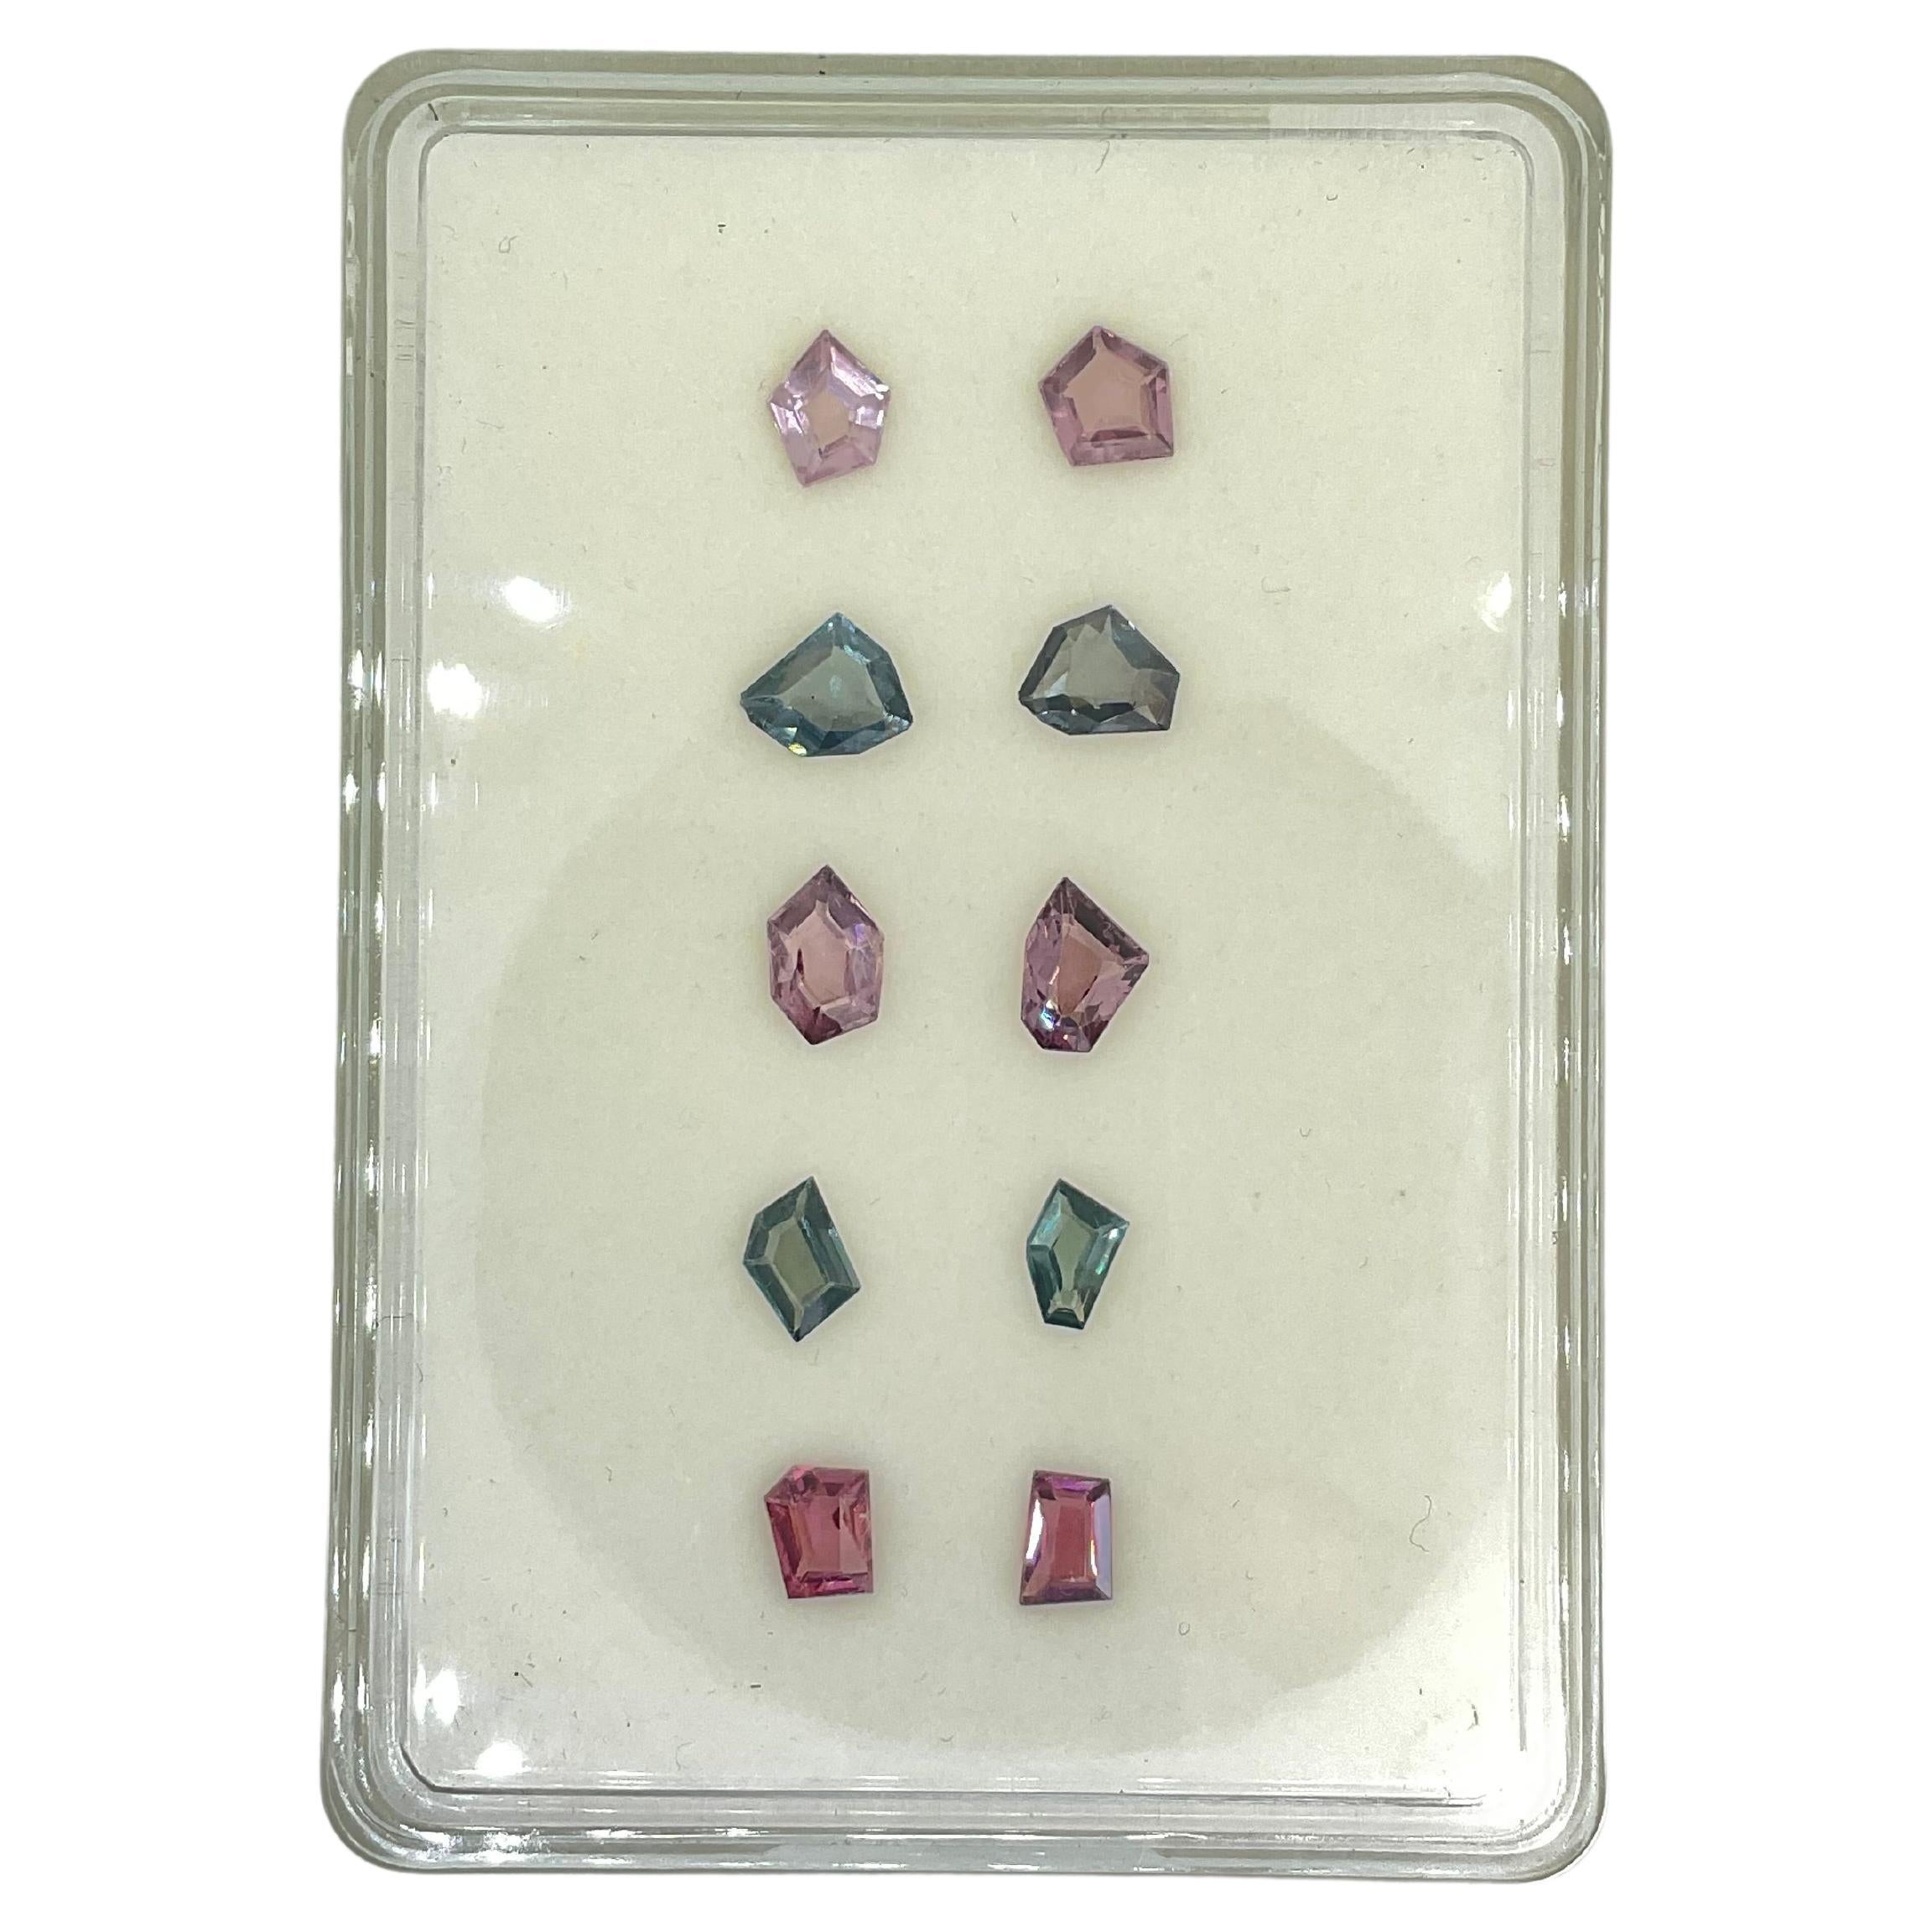 8.05 Carats Grey & Pink Spinel Fancy Cut Stone Natural Gem For Top Fine Jewelry For Sale